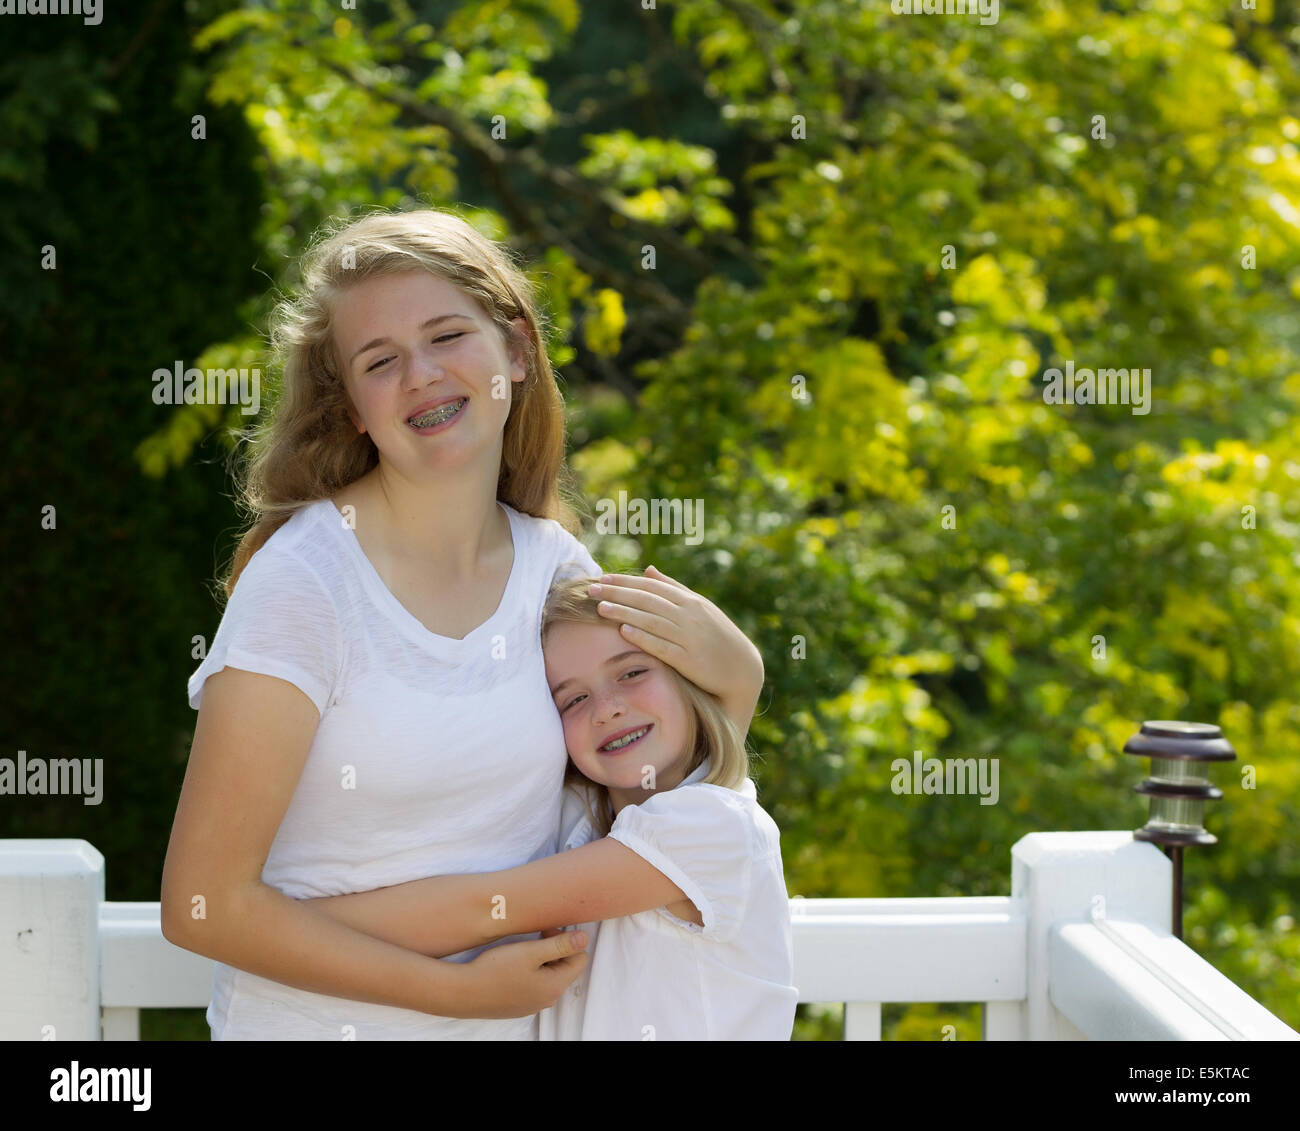 Front view of two sisters hugging each other while outdoors on patio with blurred out trees in background Stock Photo